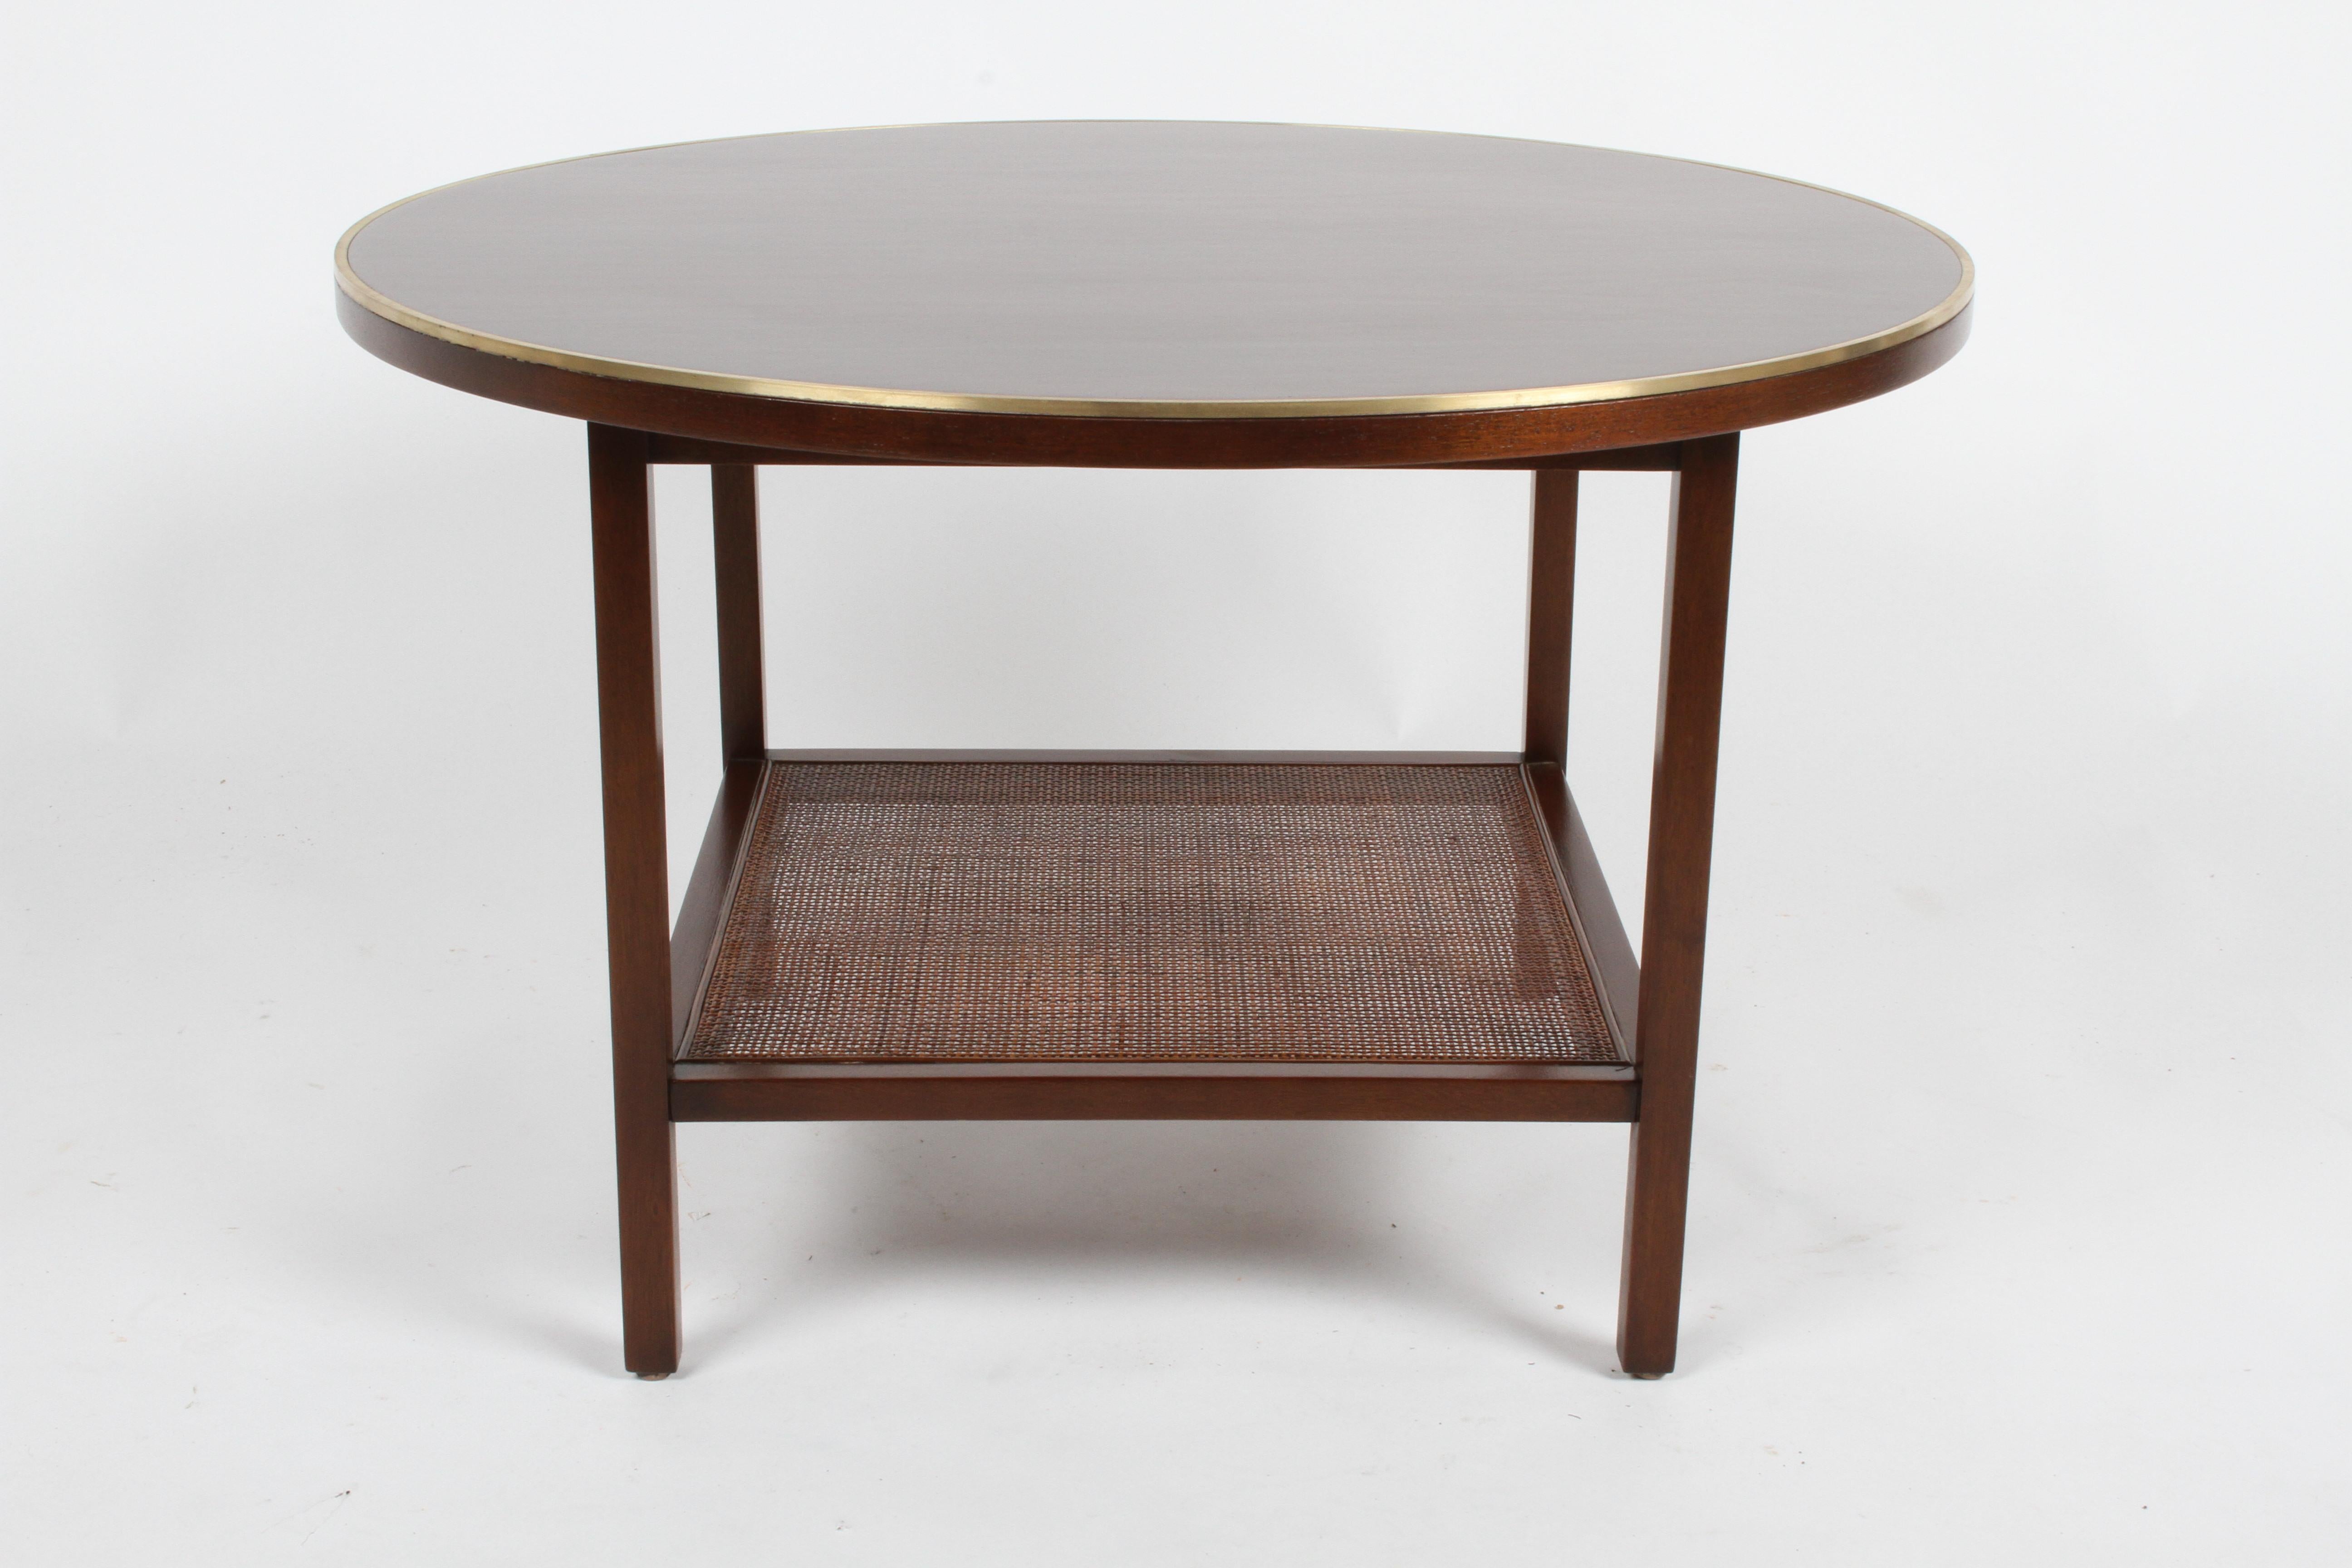 Restored Paul McCobb for Calvin model 8734 round side or end table with Mahogany top, having brass trim edge with lower wicker shelf. Refinished in a medium brown walnut stain, re-glued and polished brass trim. Label.